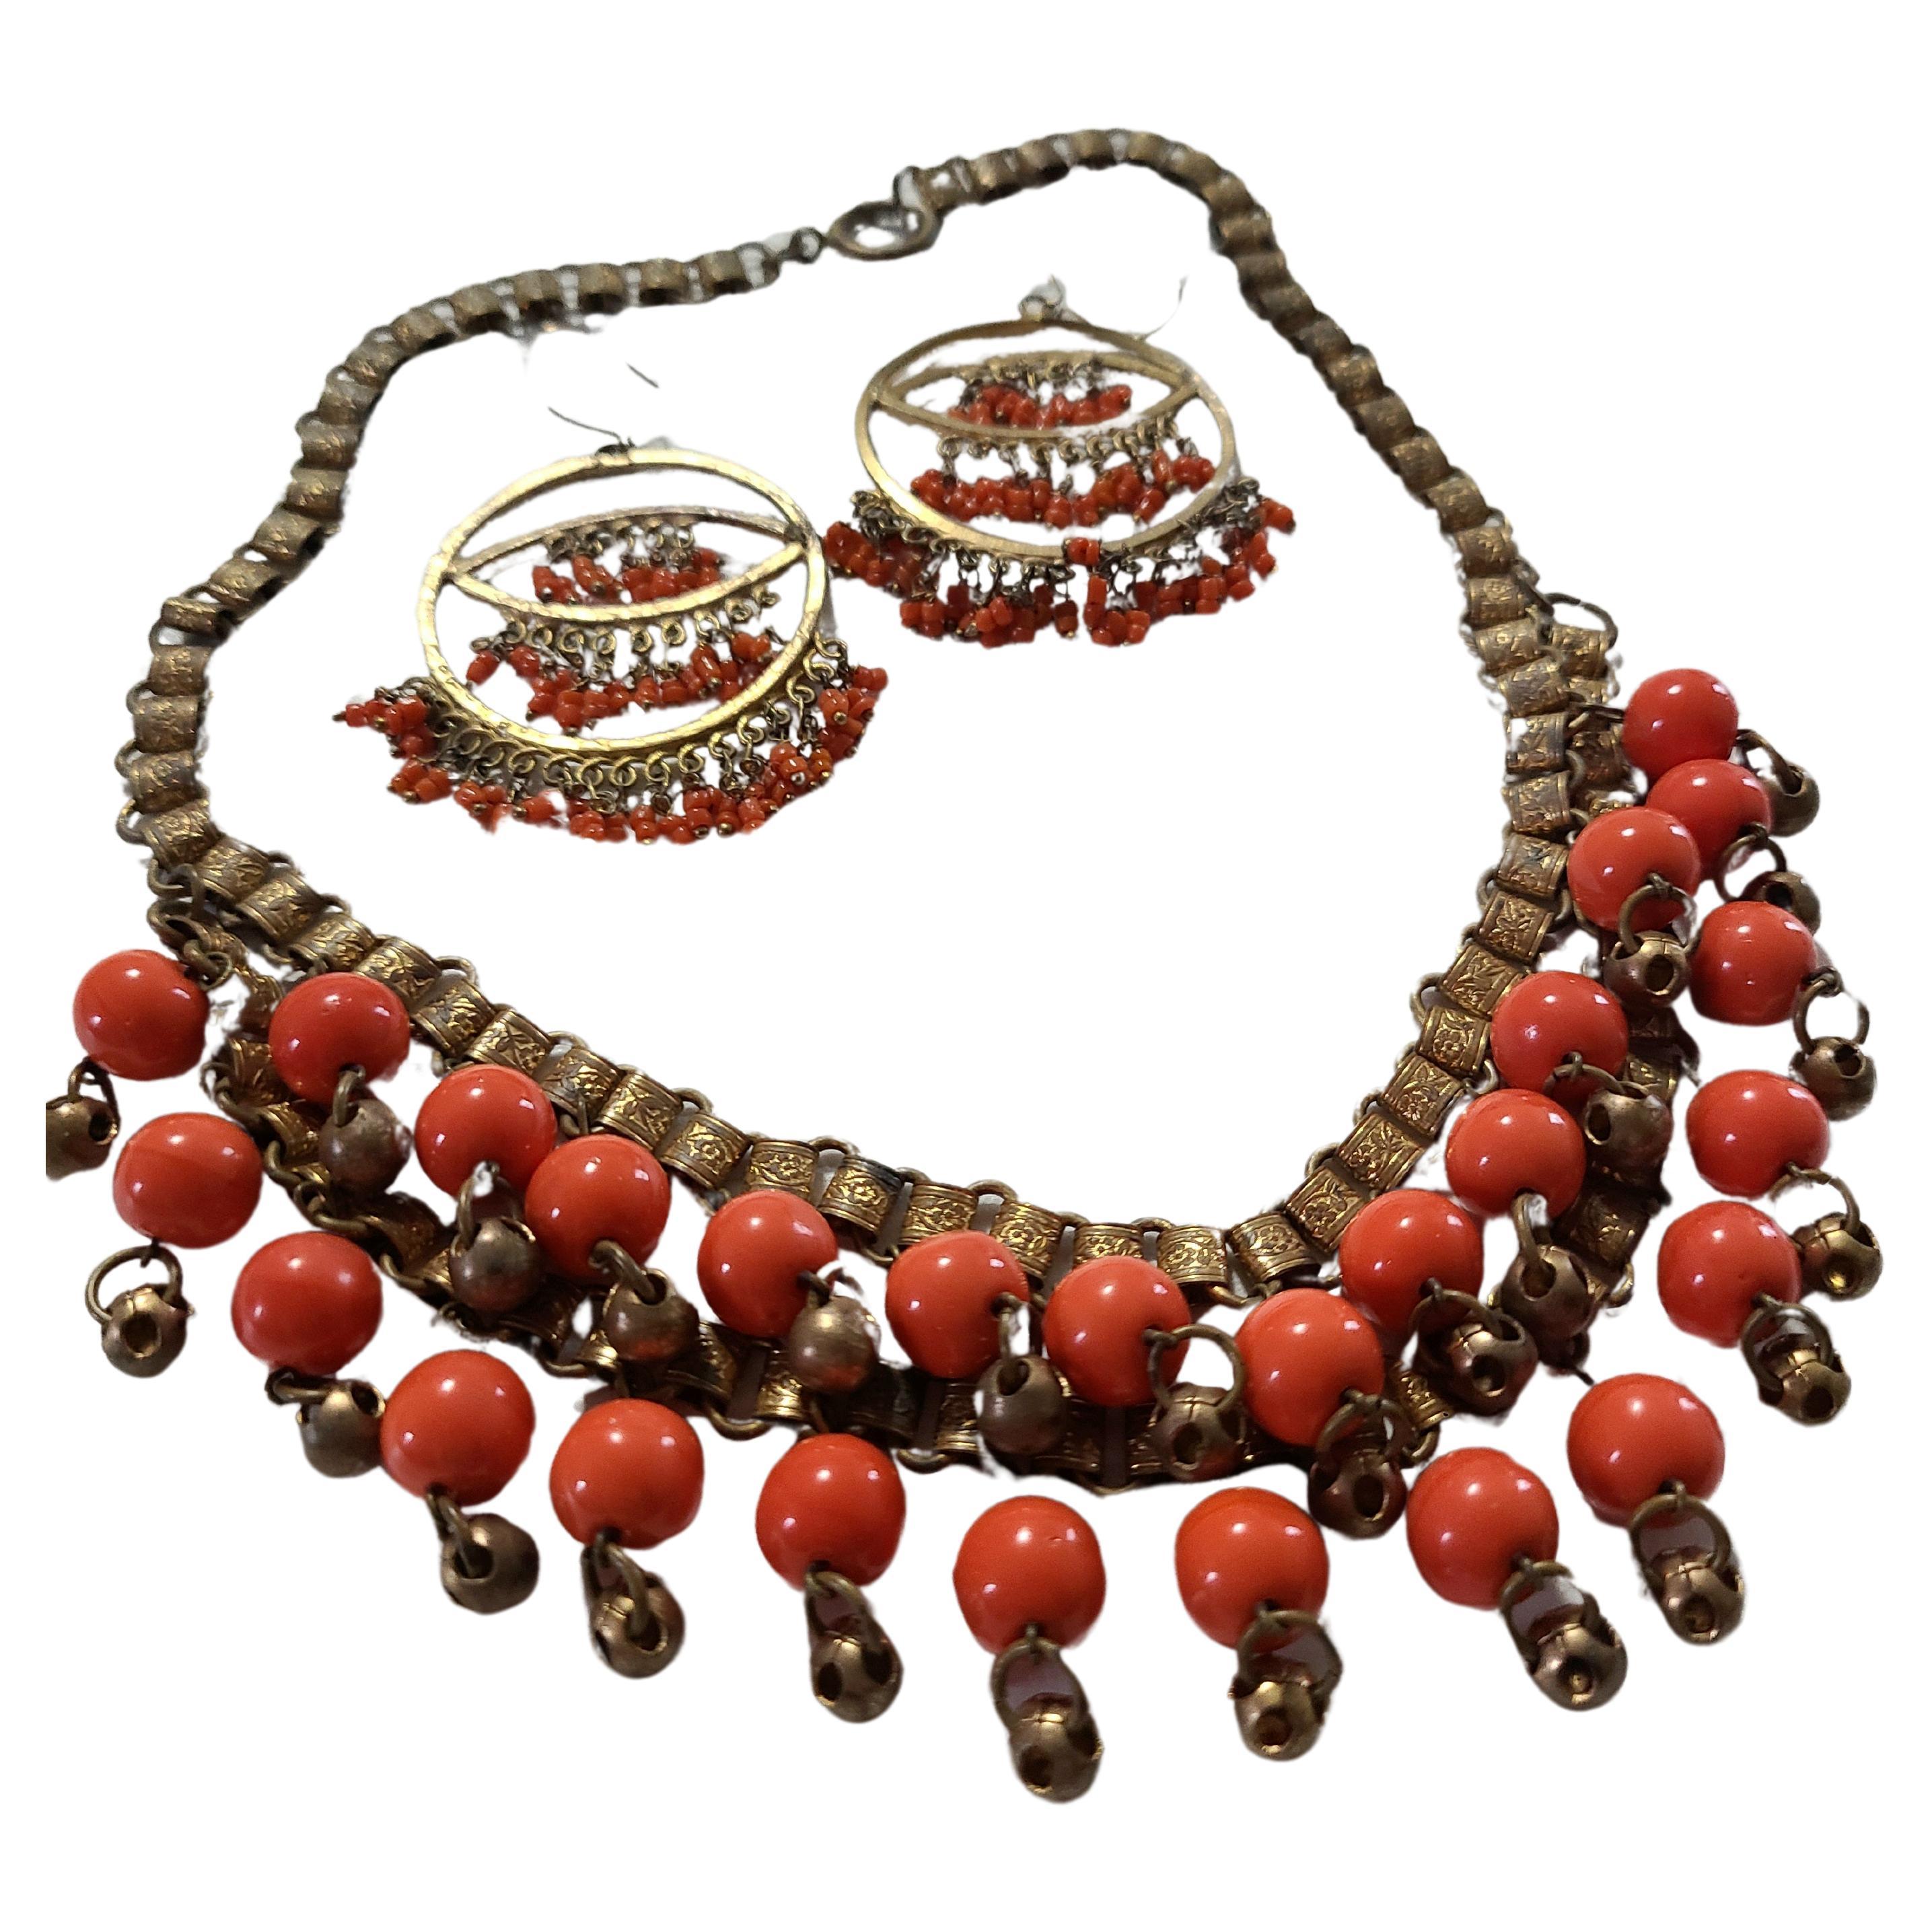 1930s Miriam Haskell Persimmon Dangling Bead Bib Necklace & Earring Set For Sale